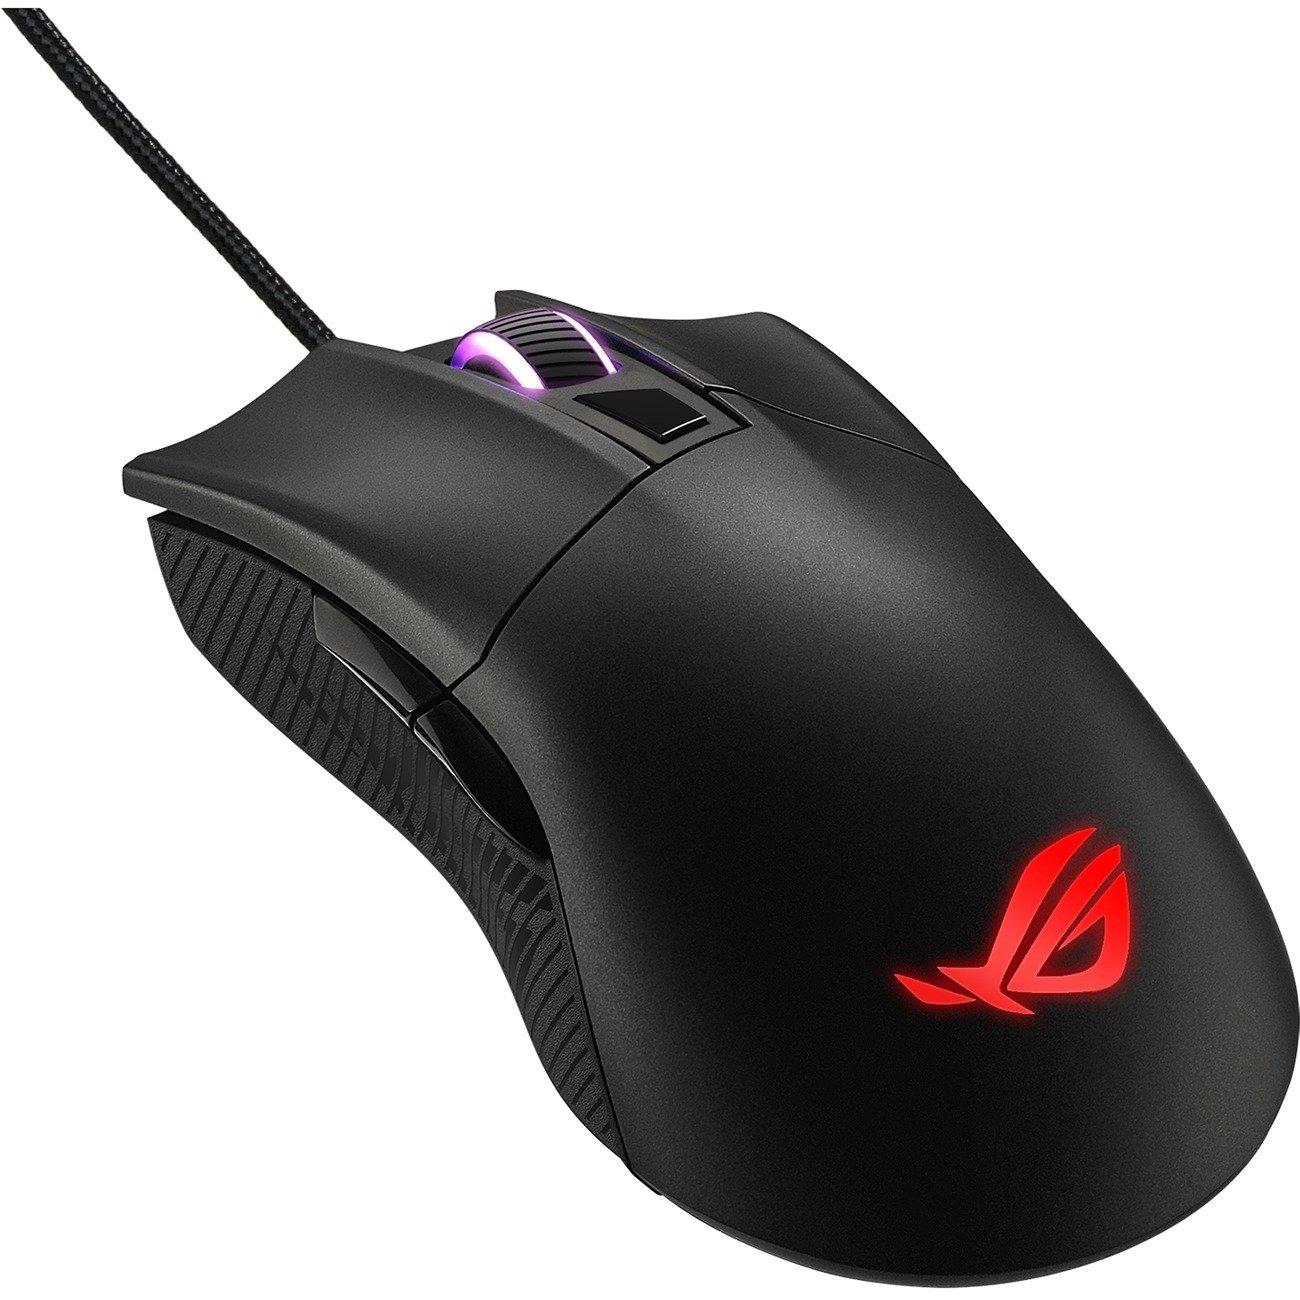 ASUS ROG P507 Gladius II Core Wired Gaming Mouse